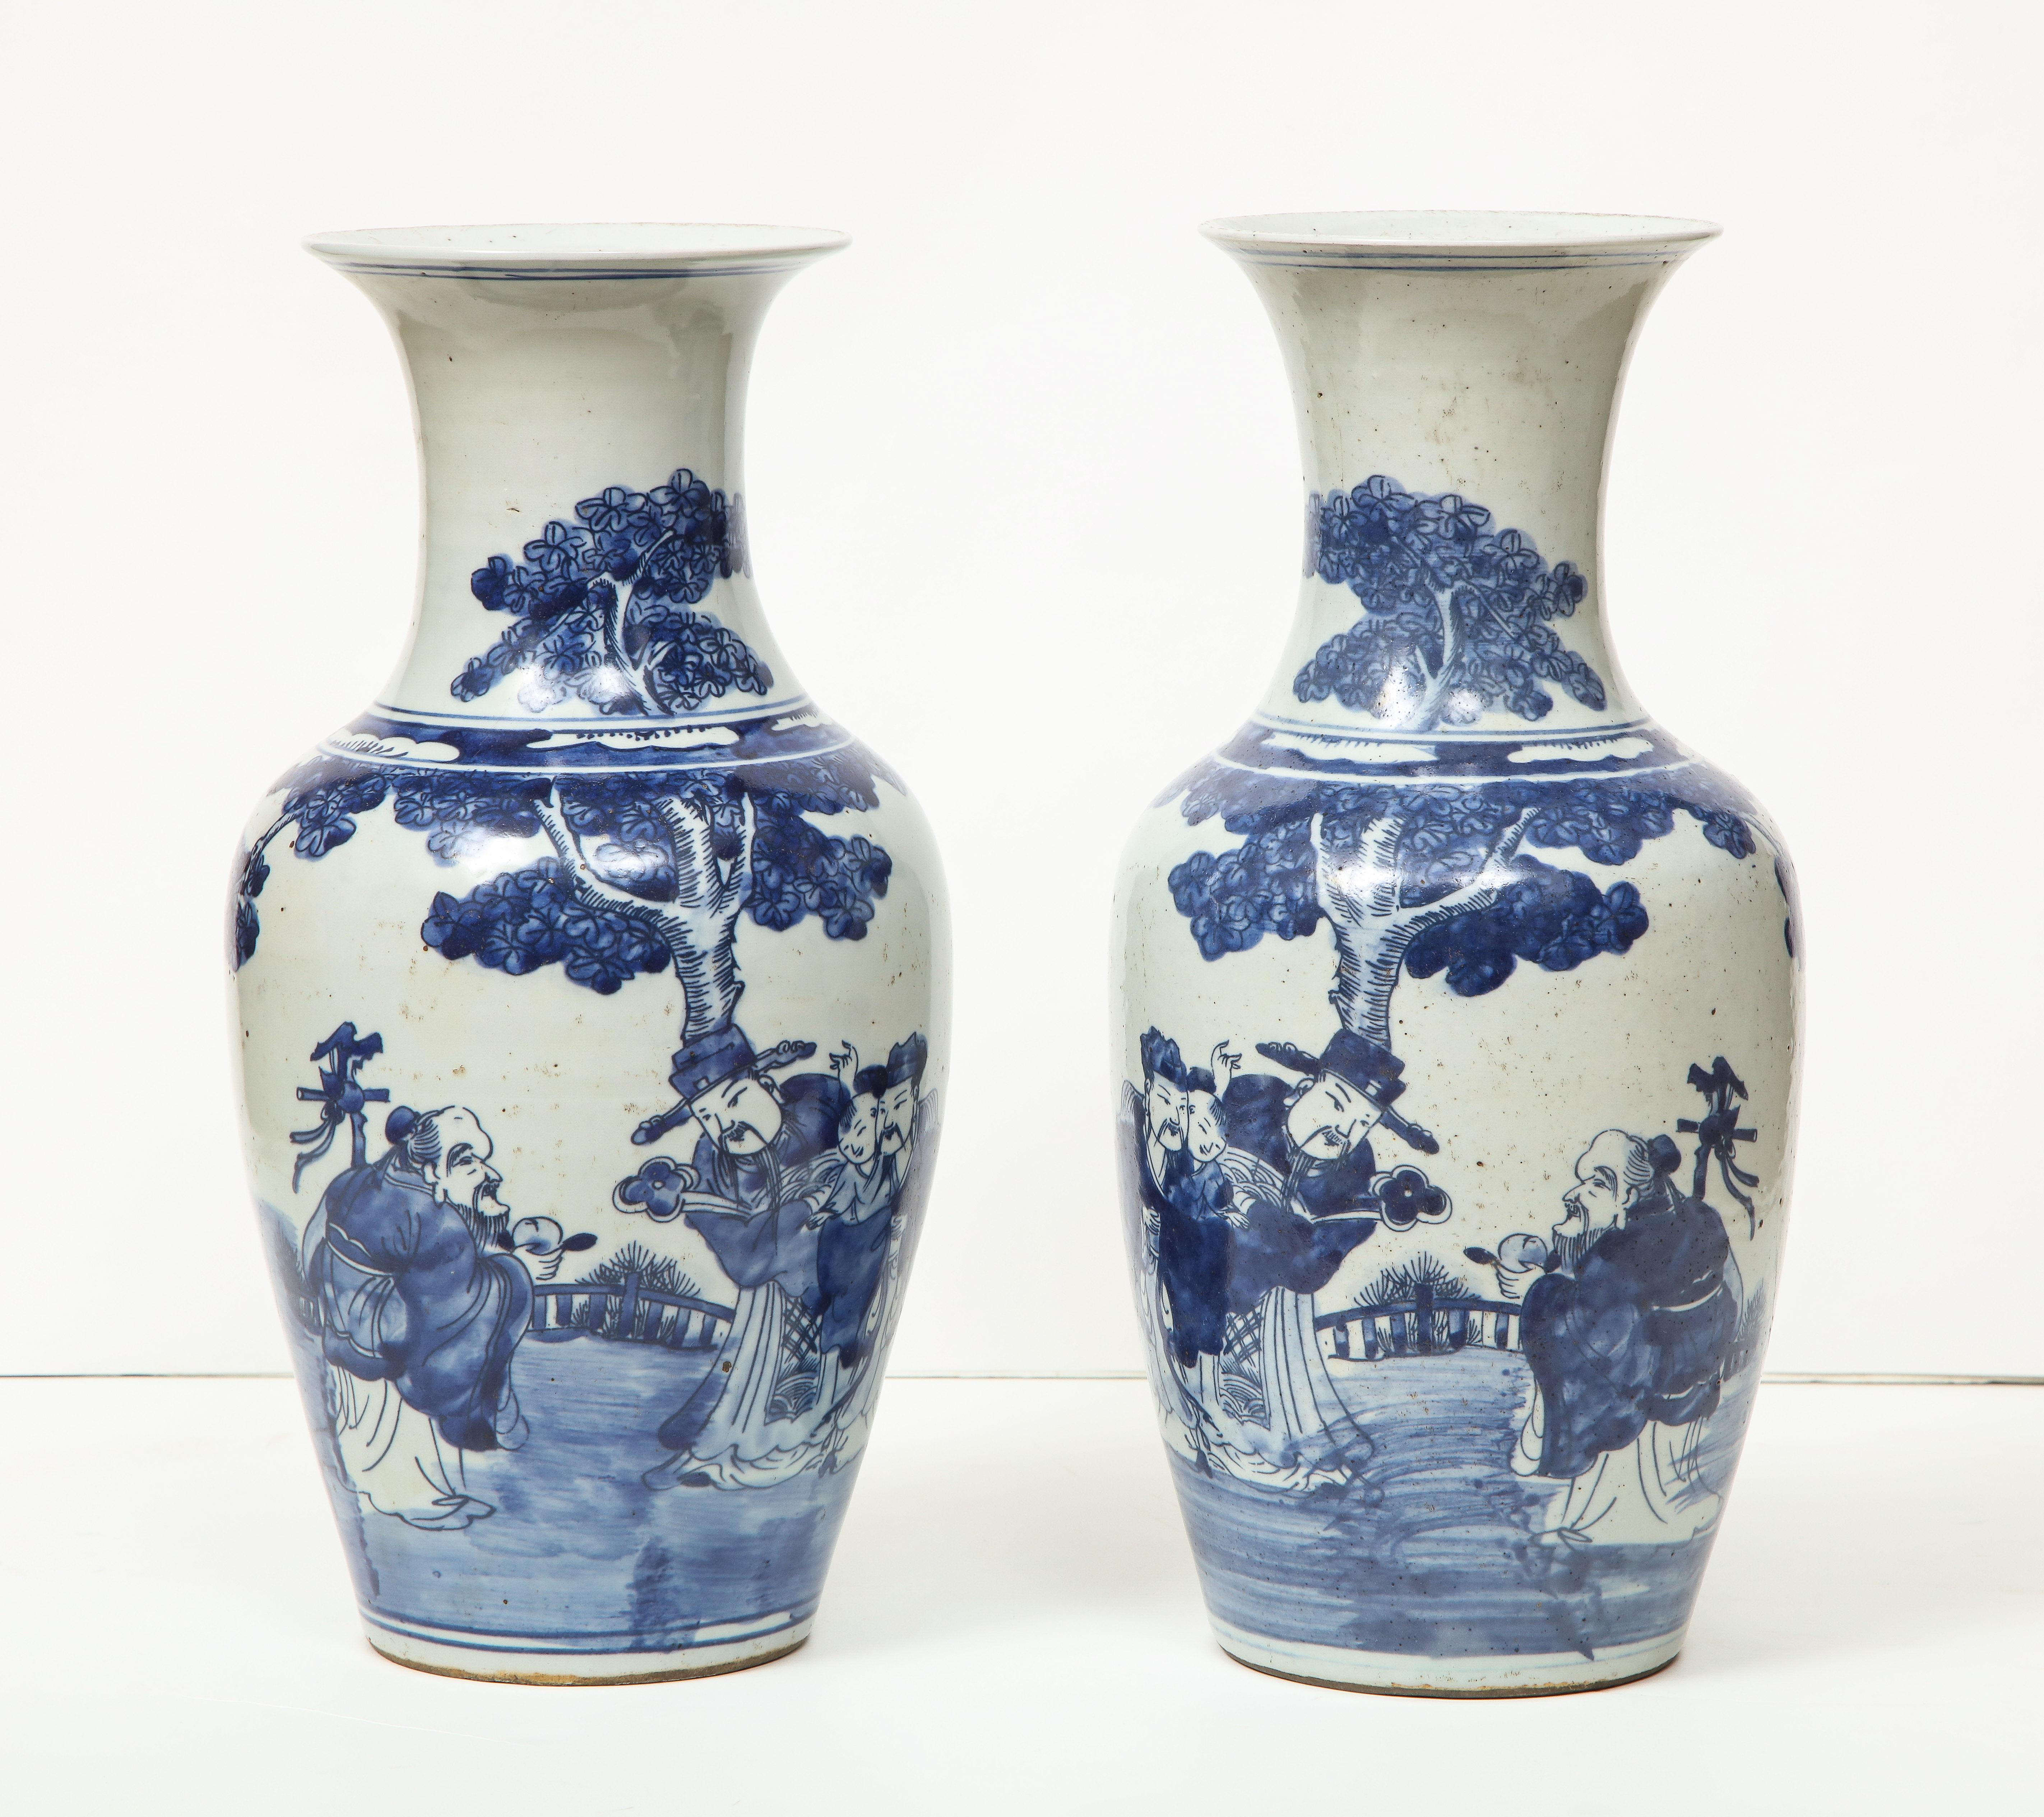 A pair of lovely Chinese export porcelain vases with a bottle neck. This pair have a timeless quality about them. They are the perfect accent pieces in a room and would look great on a mantle or as a centerpiece.